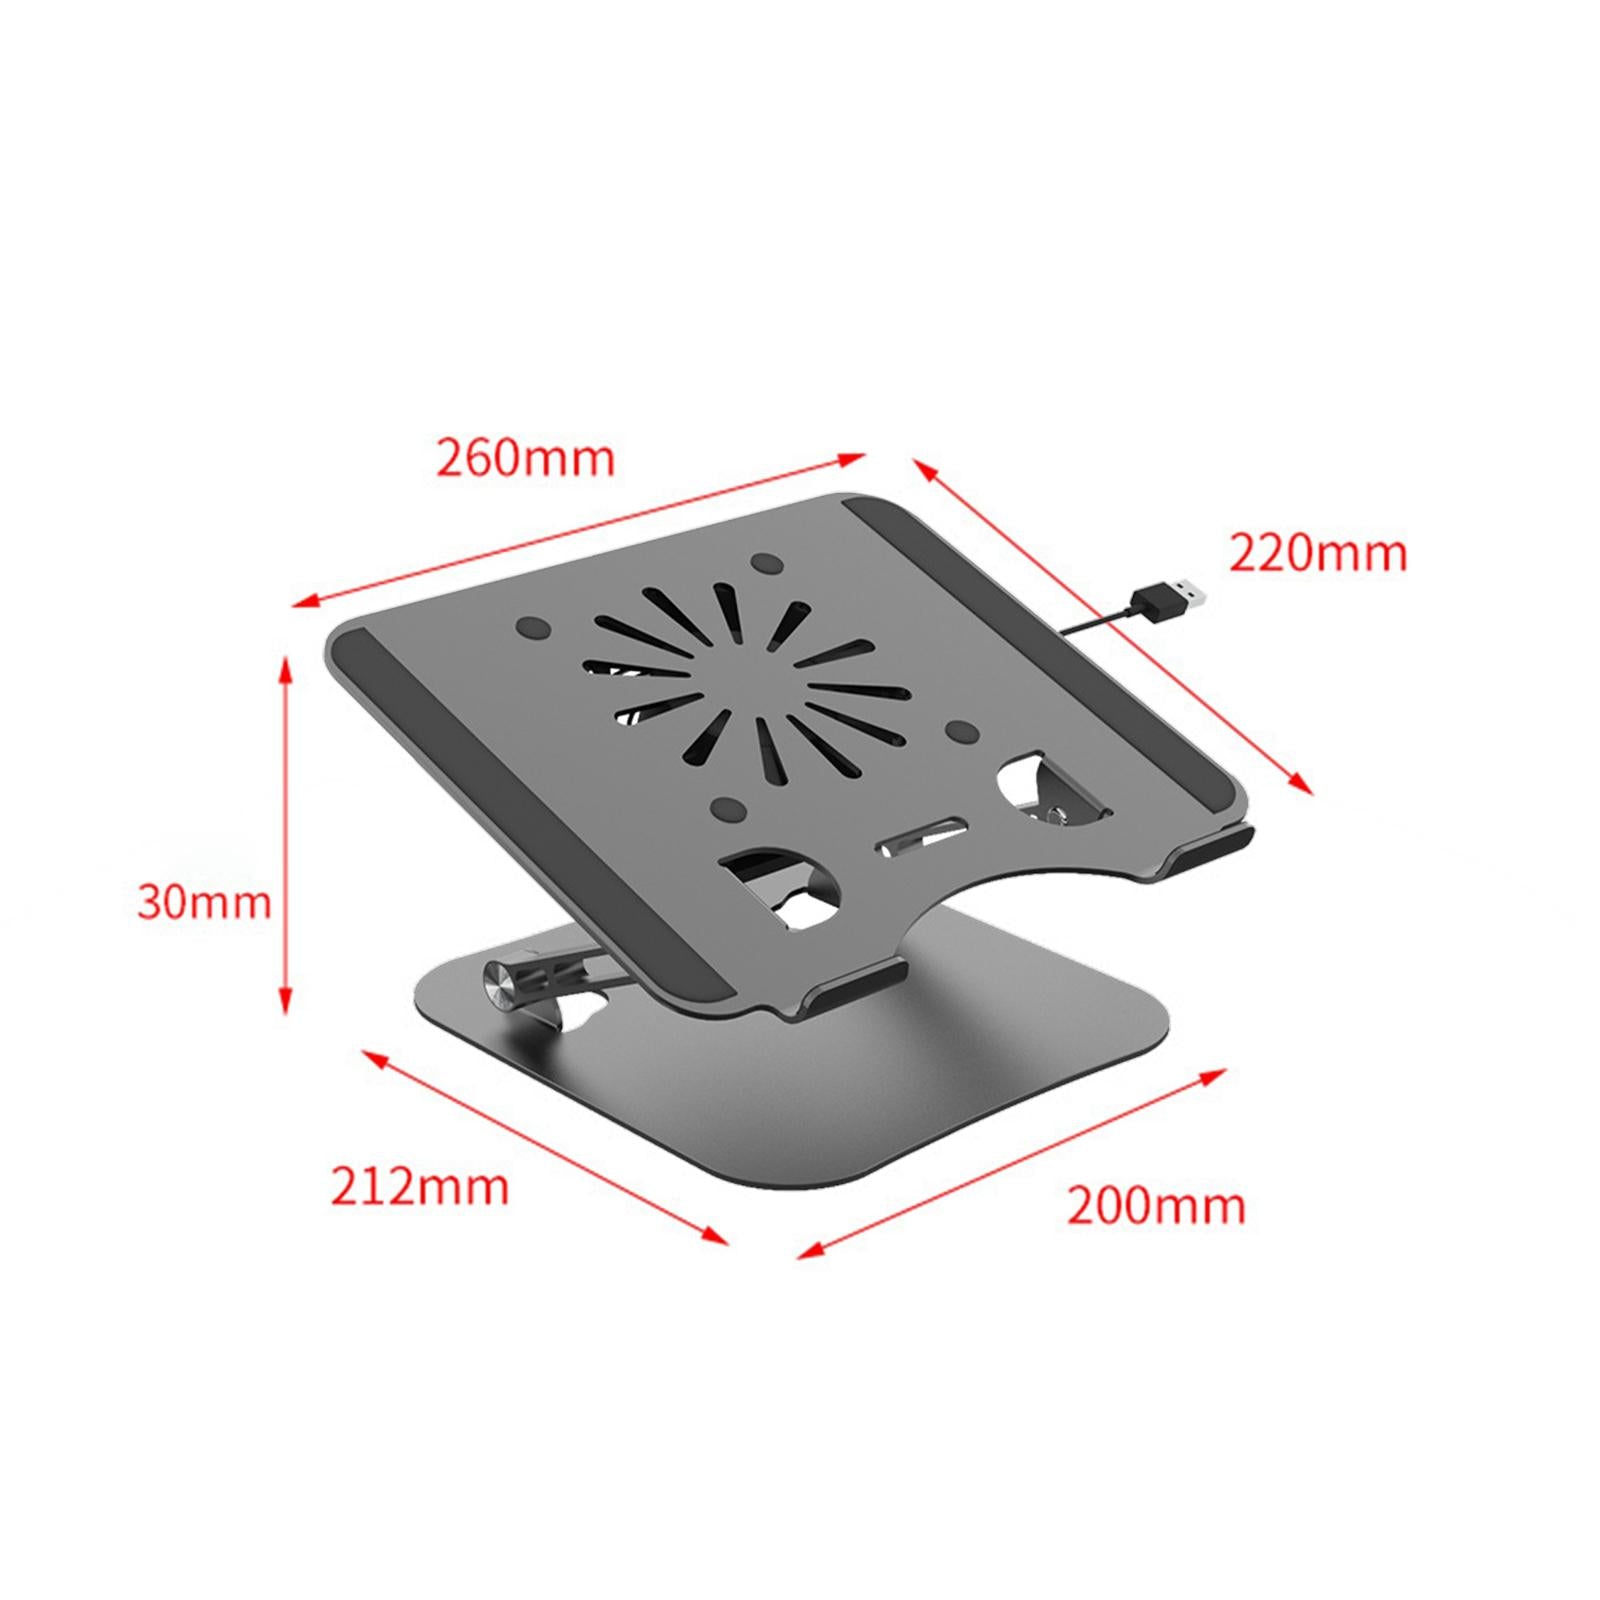 Laptop Stand with Cooling Fan Universal Aluminium Alloy Ergonomic for Home Gray